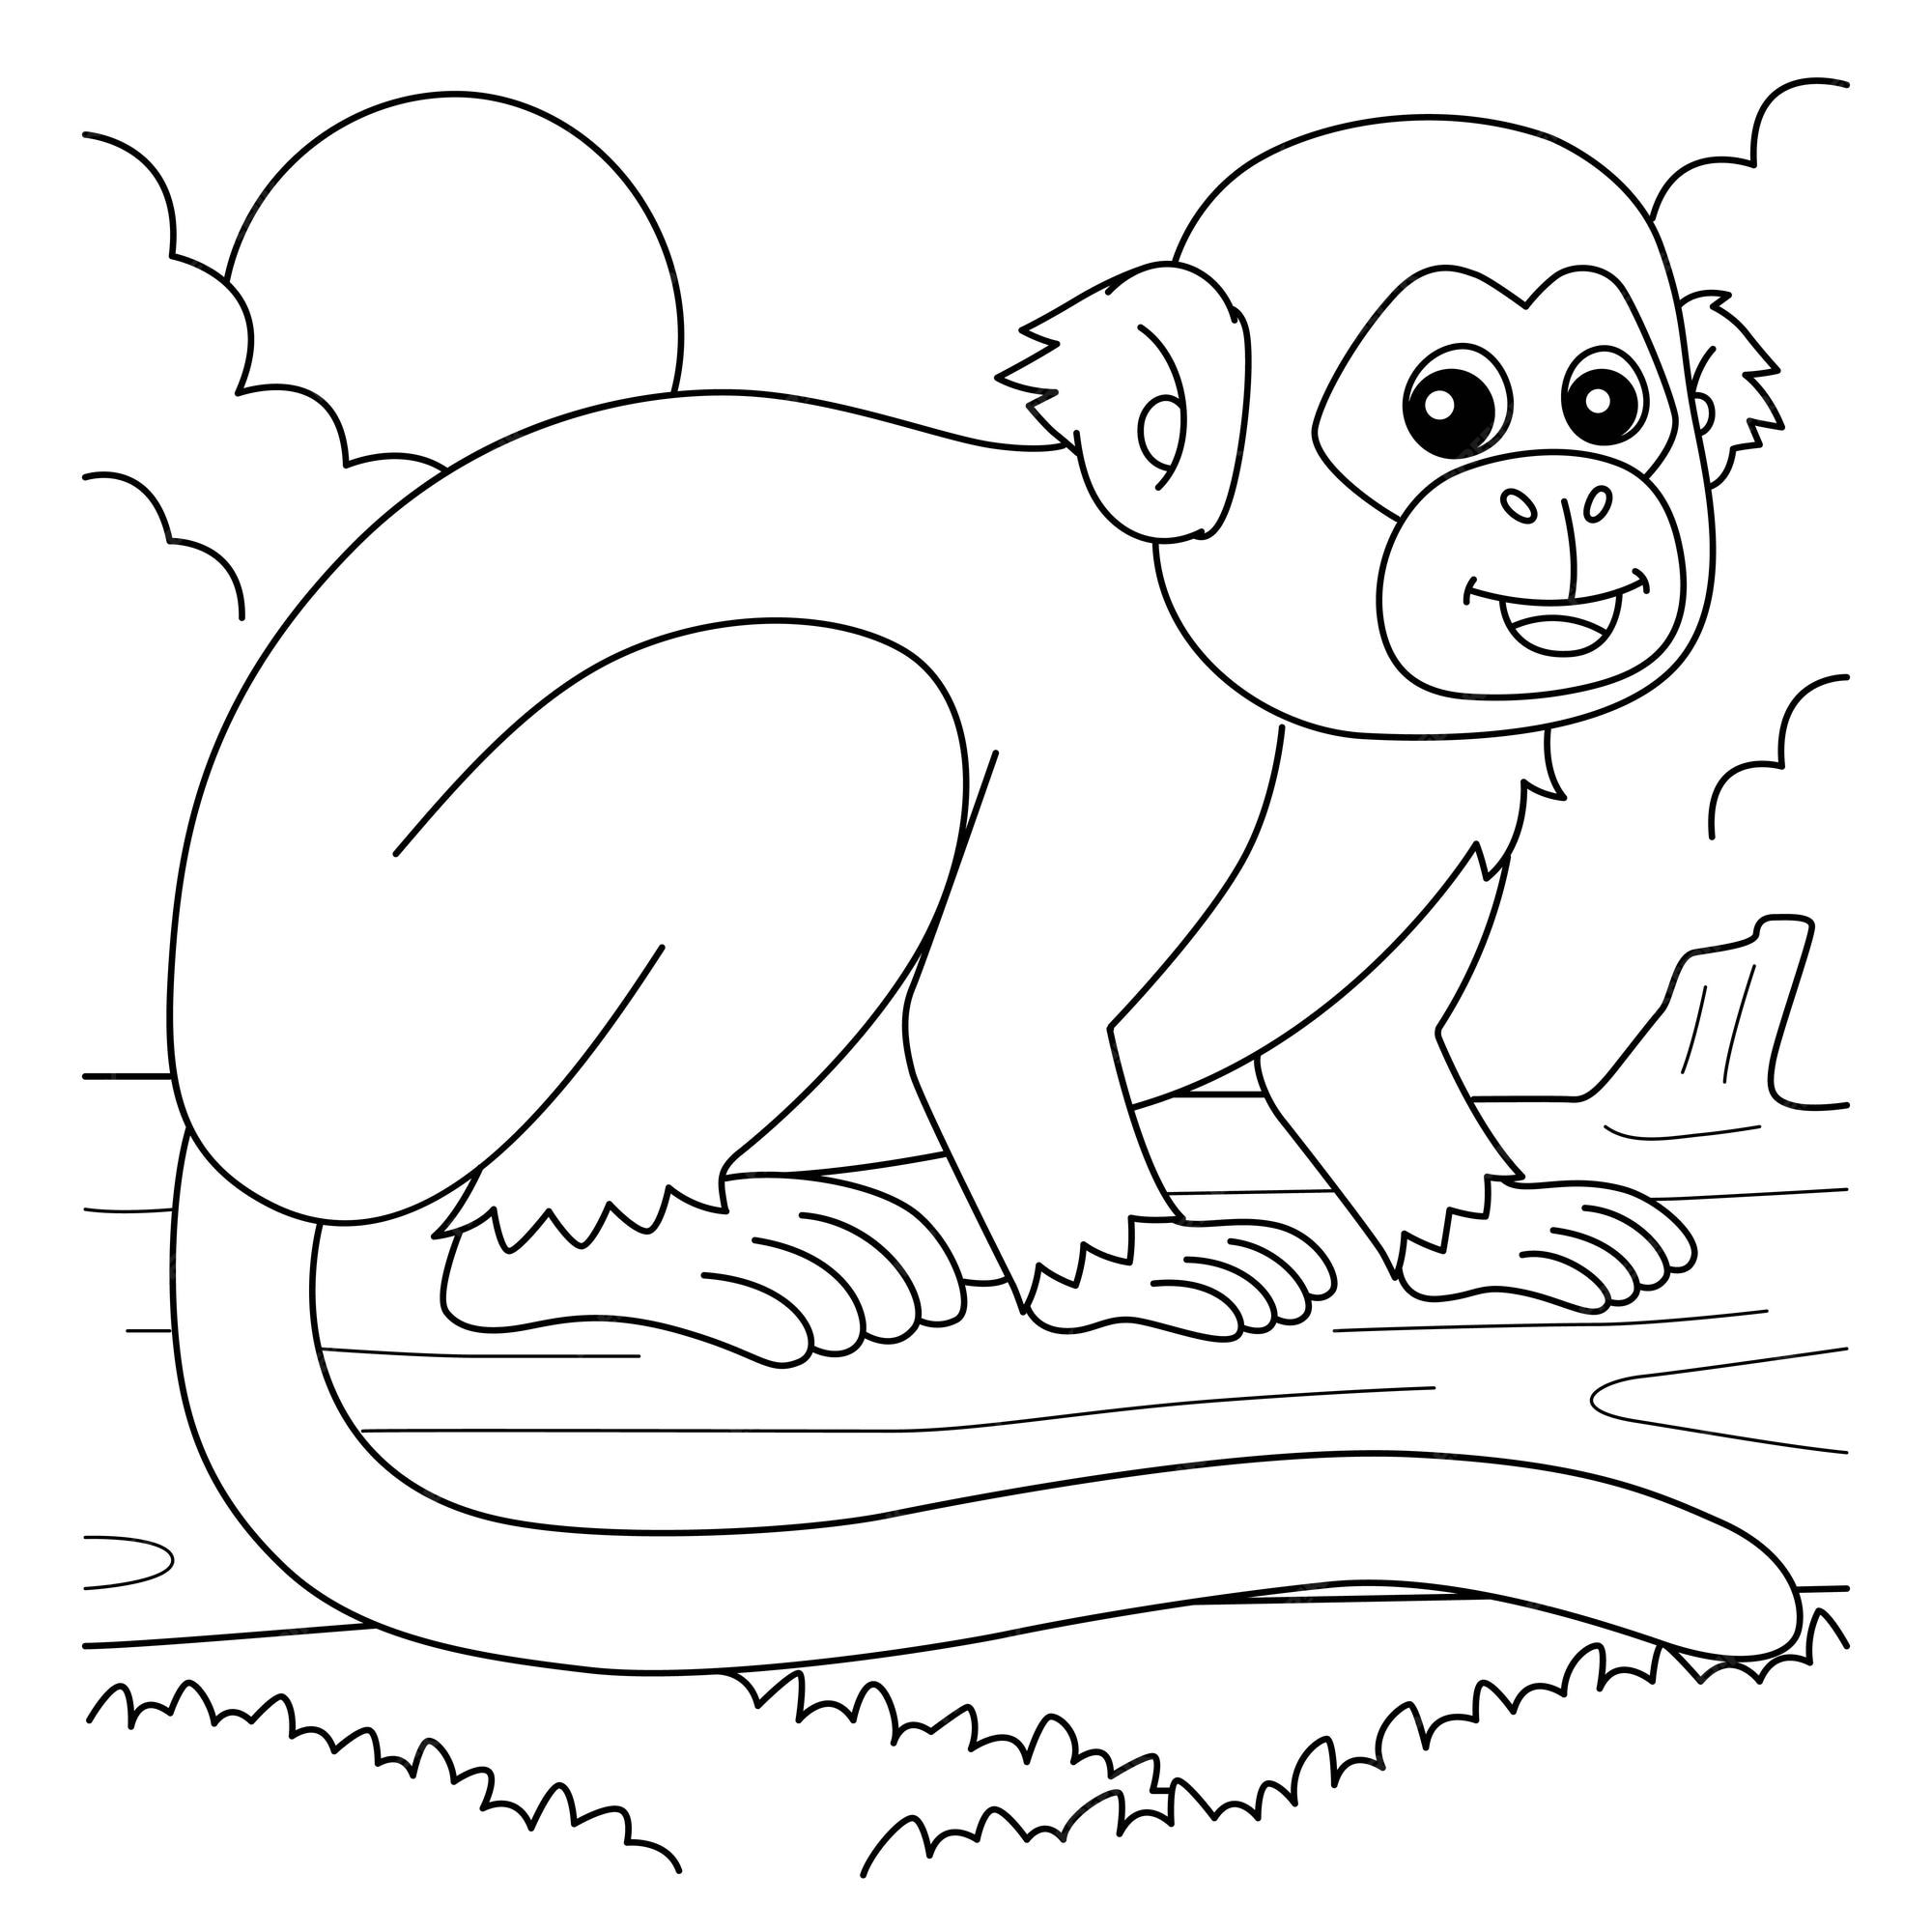 Premium vector squirrel monkey animal coloring page for kids